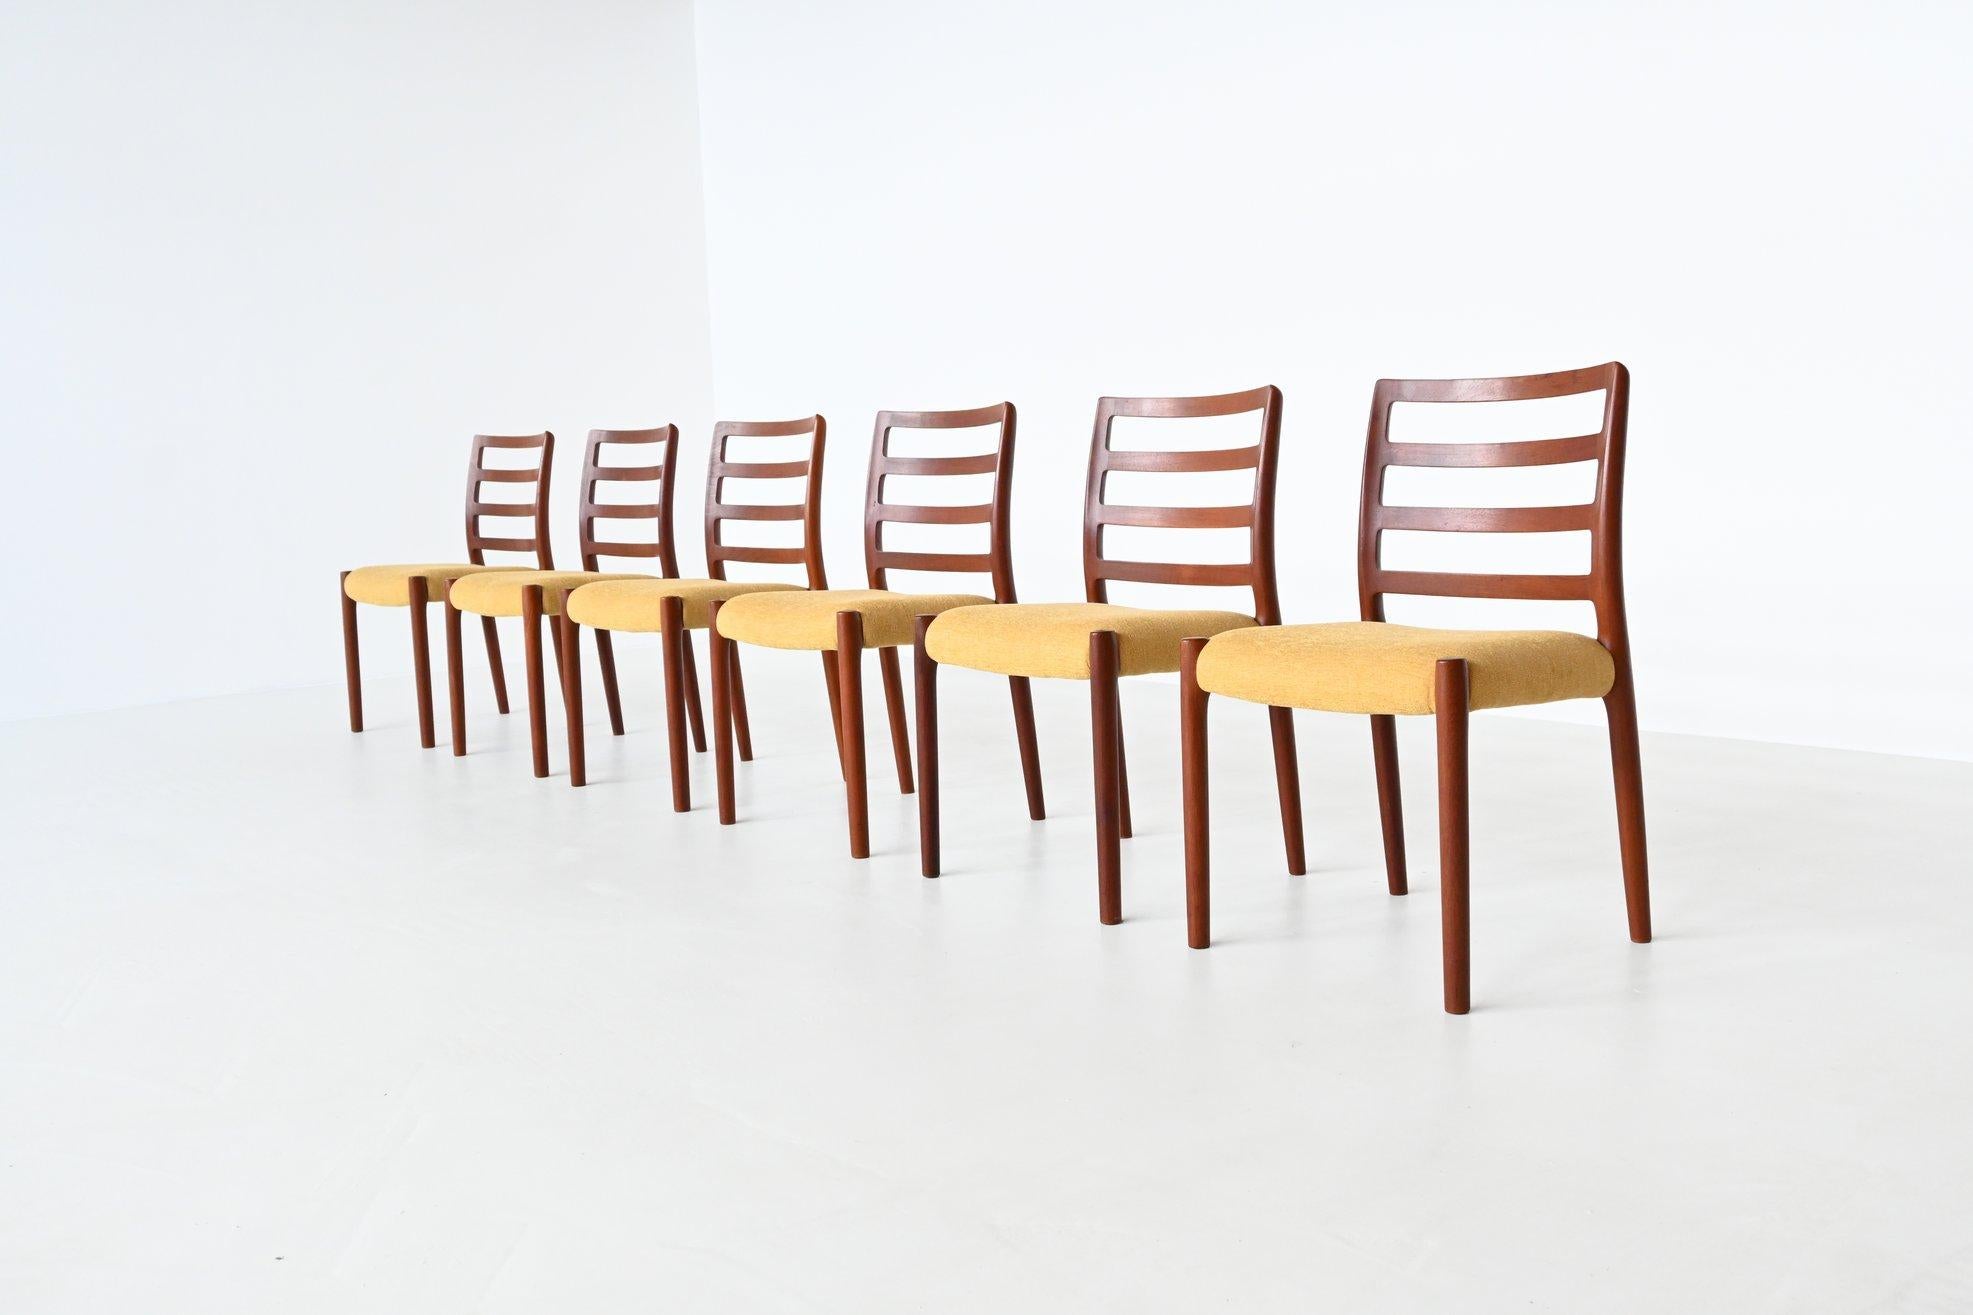 Very nice set of six dining chairs model 85 designed by Niels Otto Møller and manufactured by J.L. Møller Mobelfabrik, Denmark 1960. They are made of solid teak wood and the seats are upholstered with yellow wool fabric. These beautiful shaped